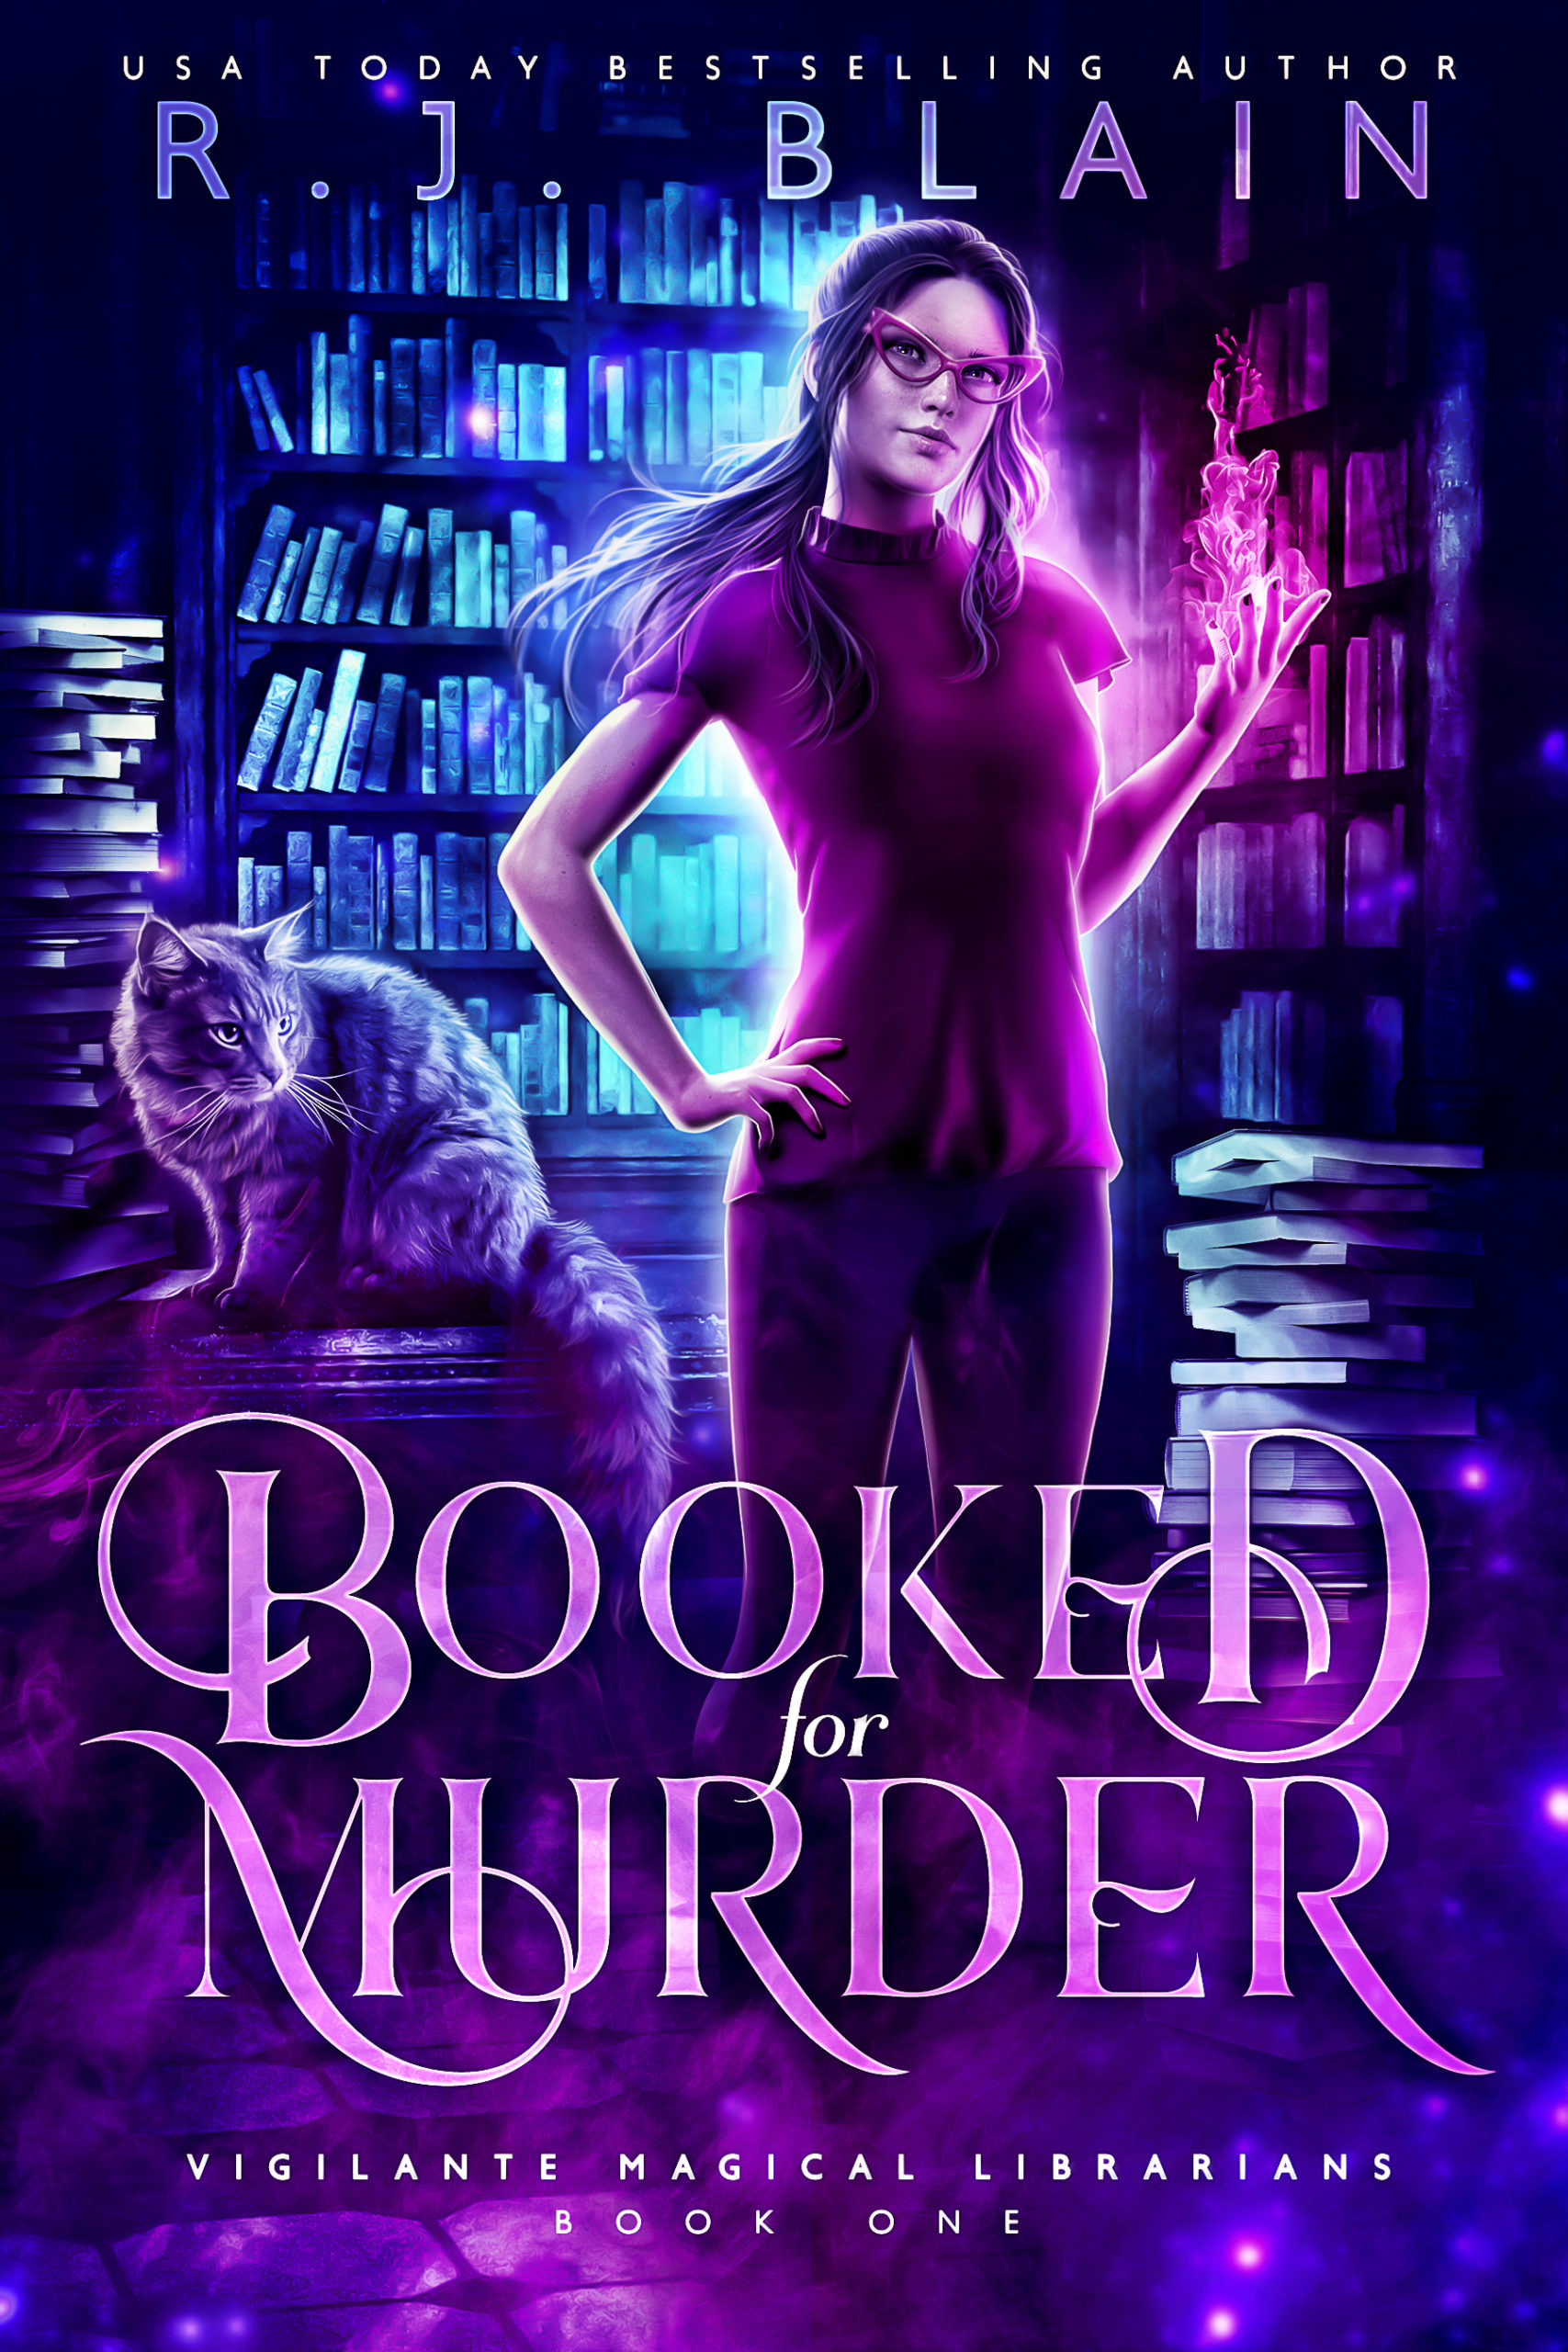 Booked for Murder is now available, humans!